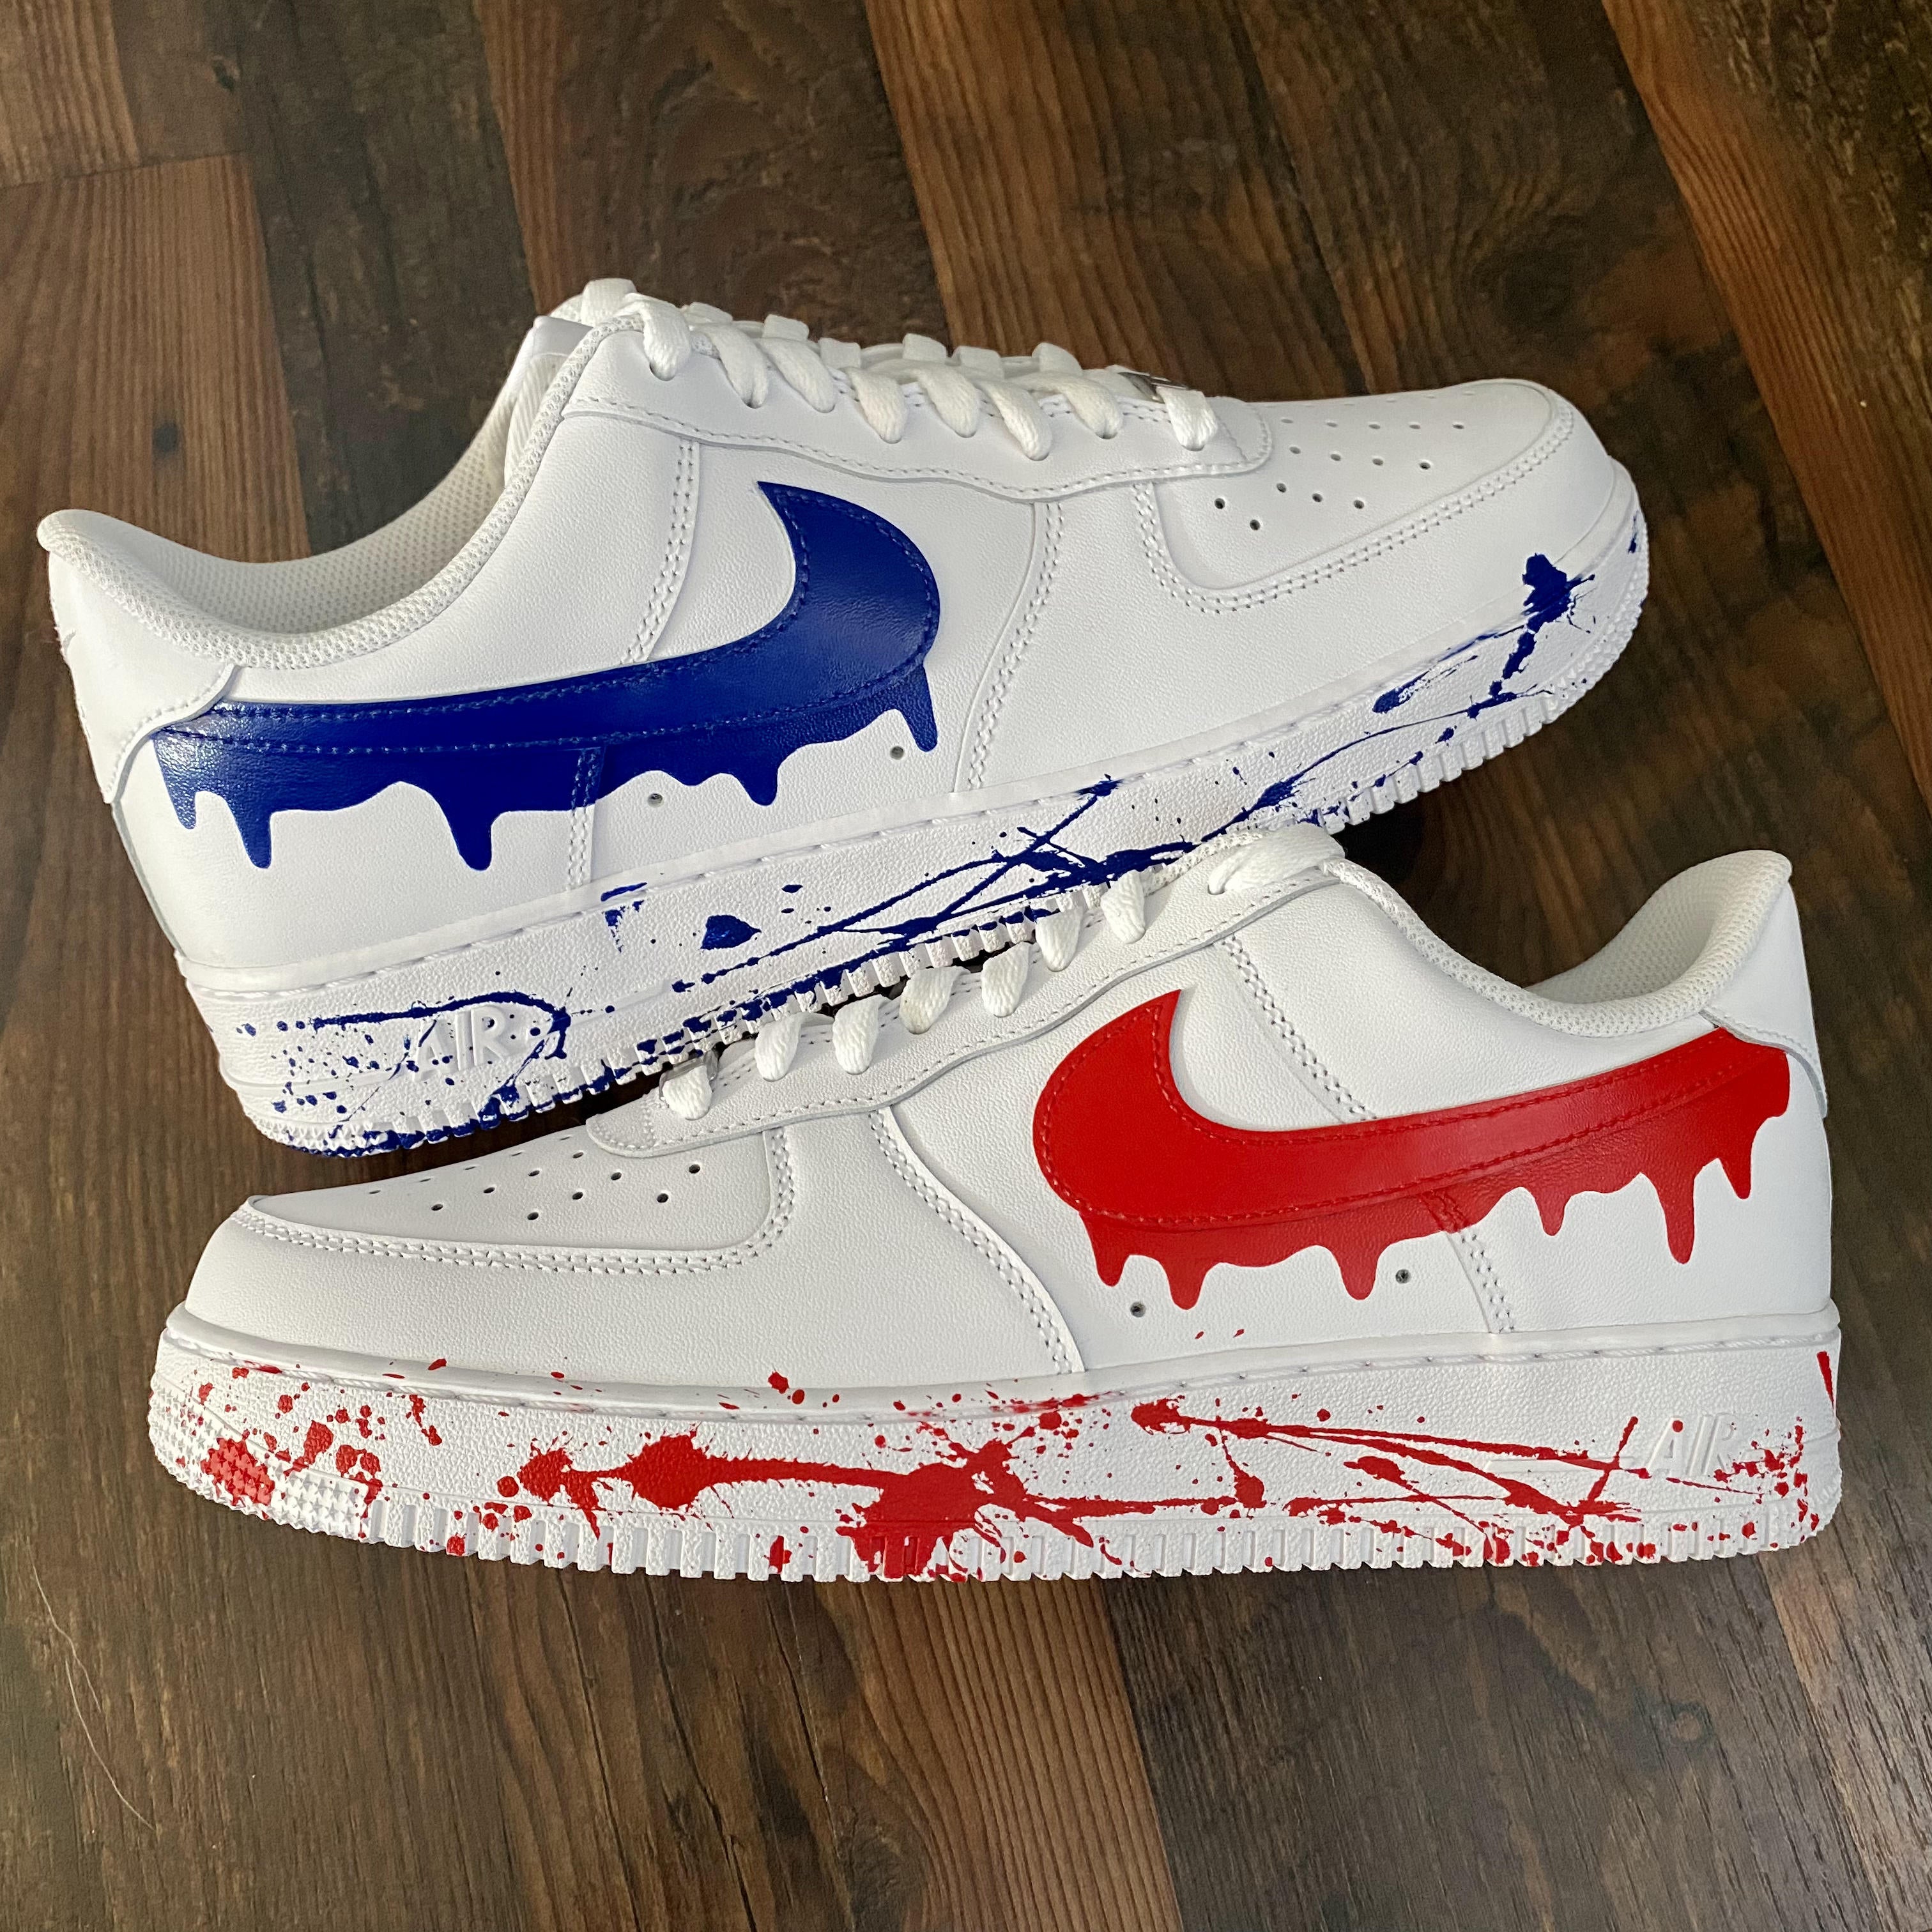 Custom Nike Shoes. Red-black Drip Hand-painted Ebernon Lows 